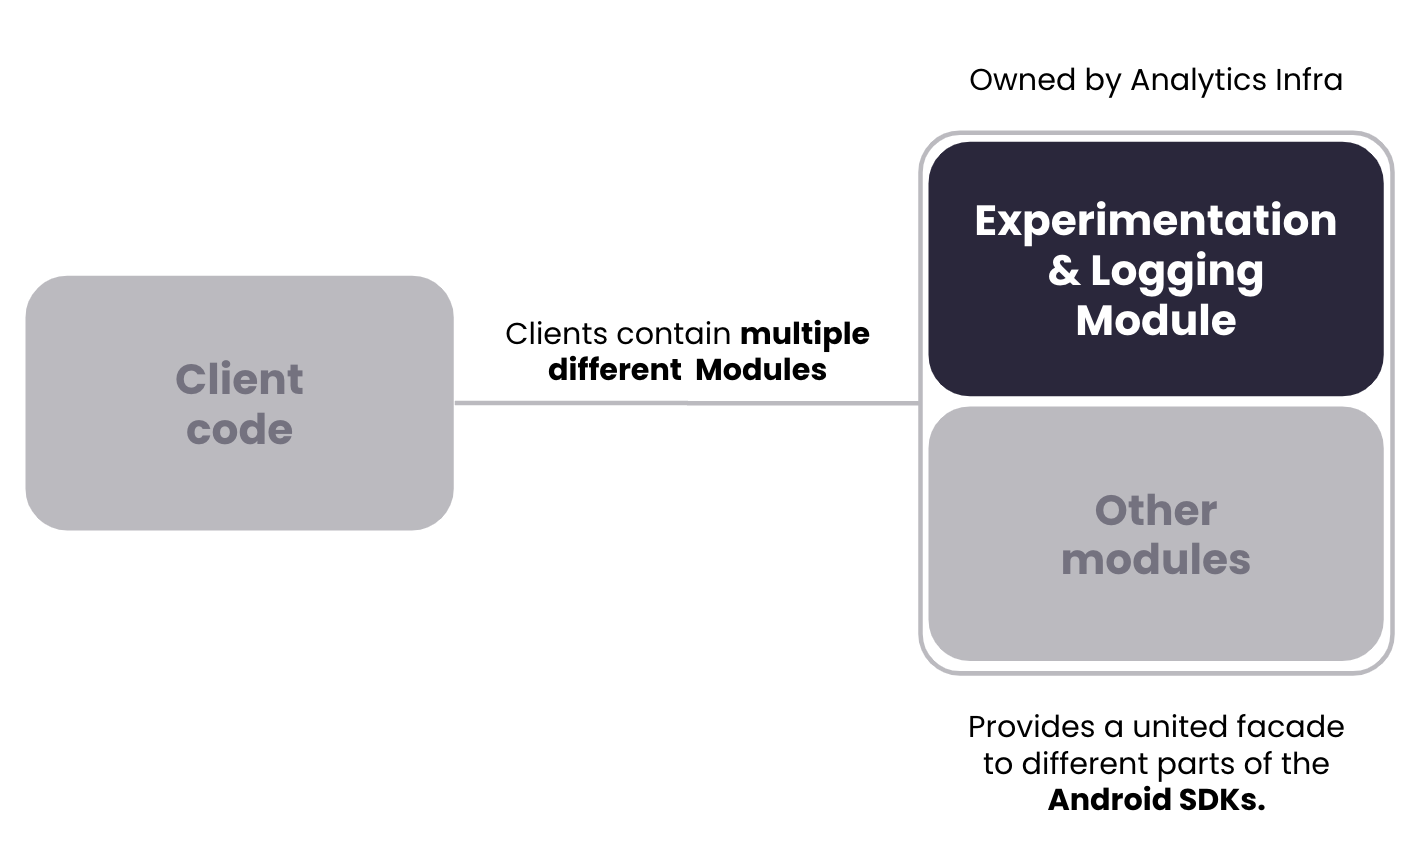 Fig 1. Overview of how the client library uses our Logging & Experimentation SDK to publish and analyze data